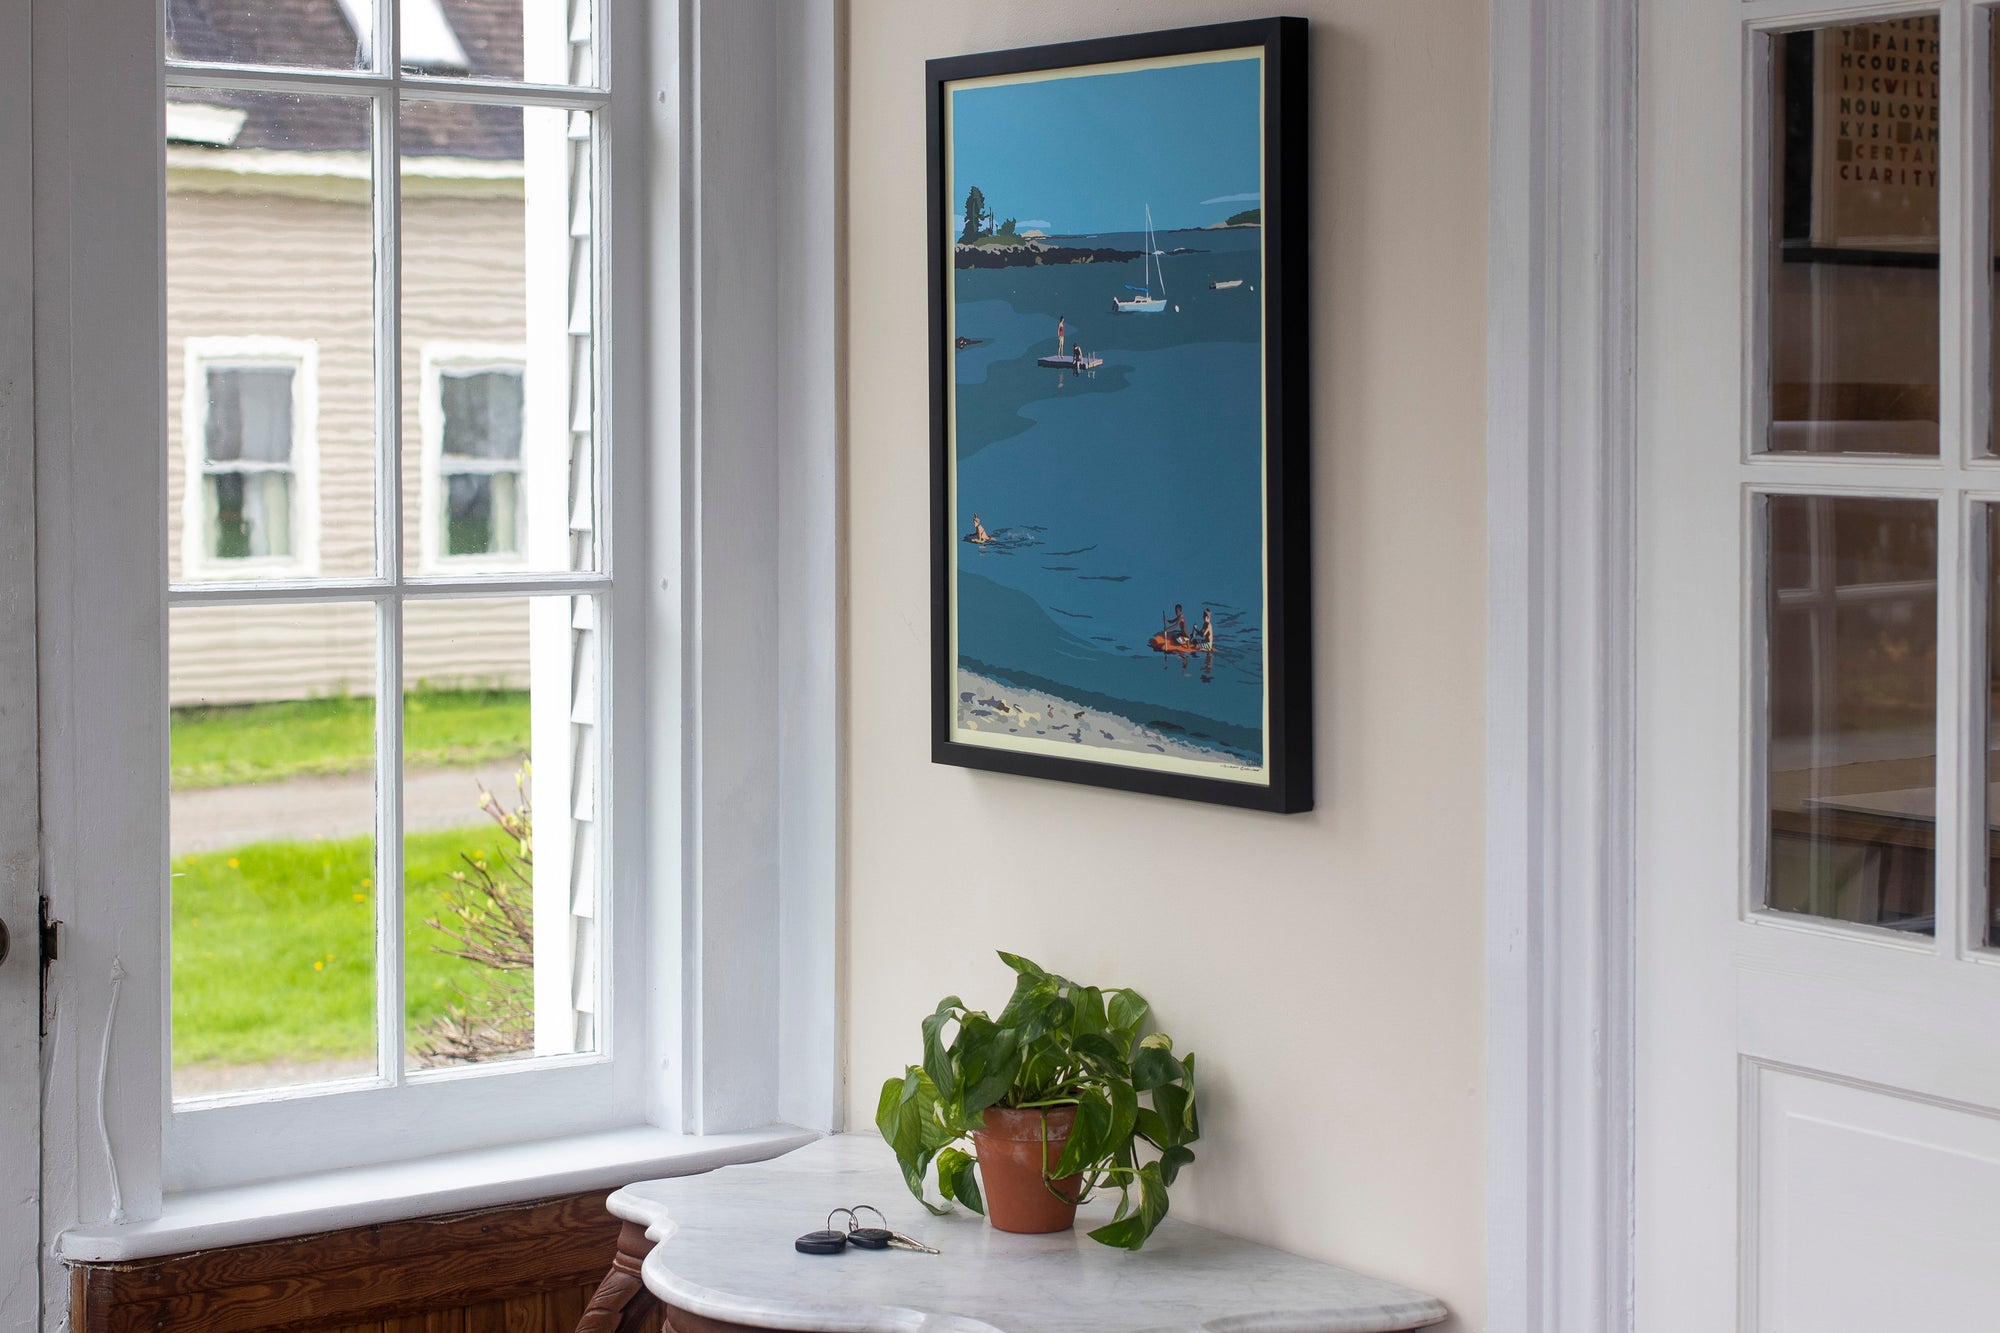 Ocean Point Swimmers Art Print 18" x 24" Framed Wall Poster by Alan Claude - Maine